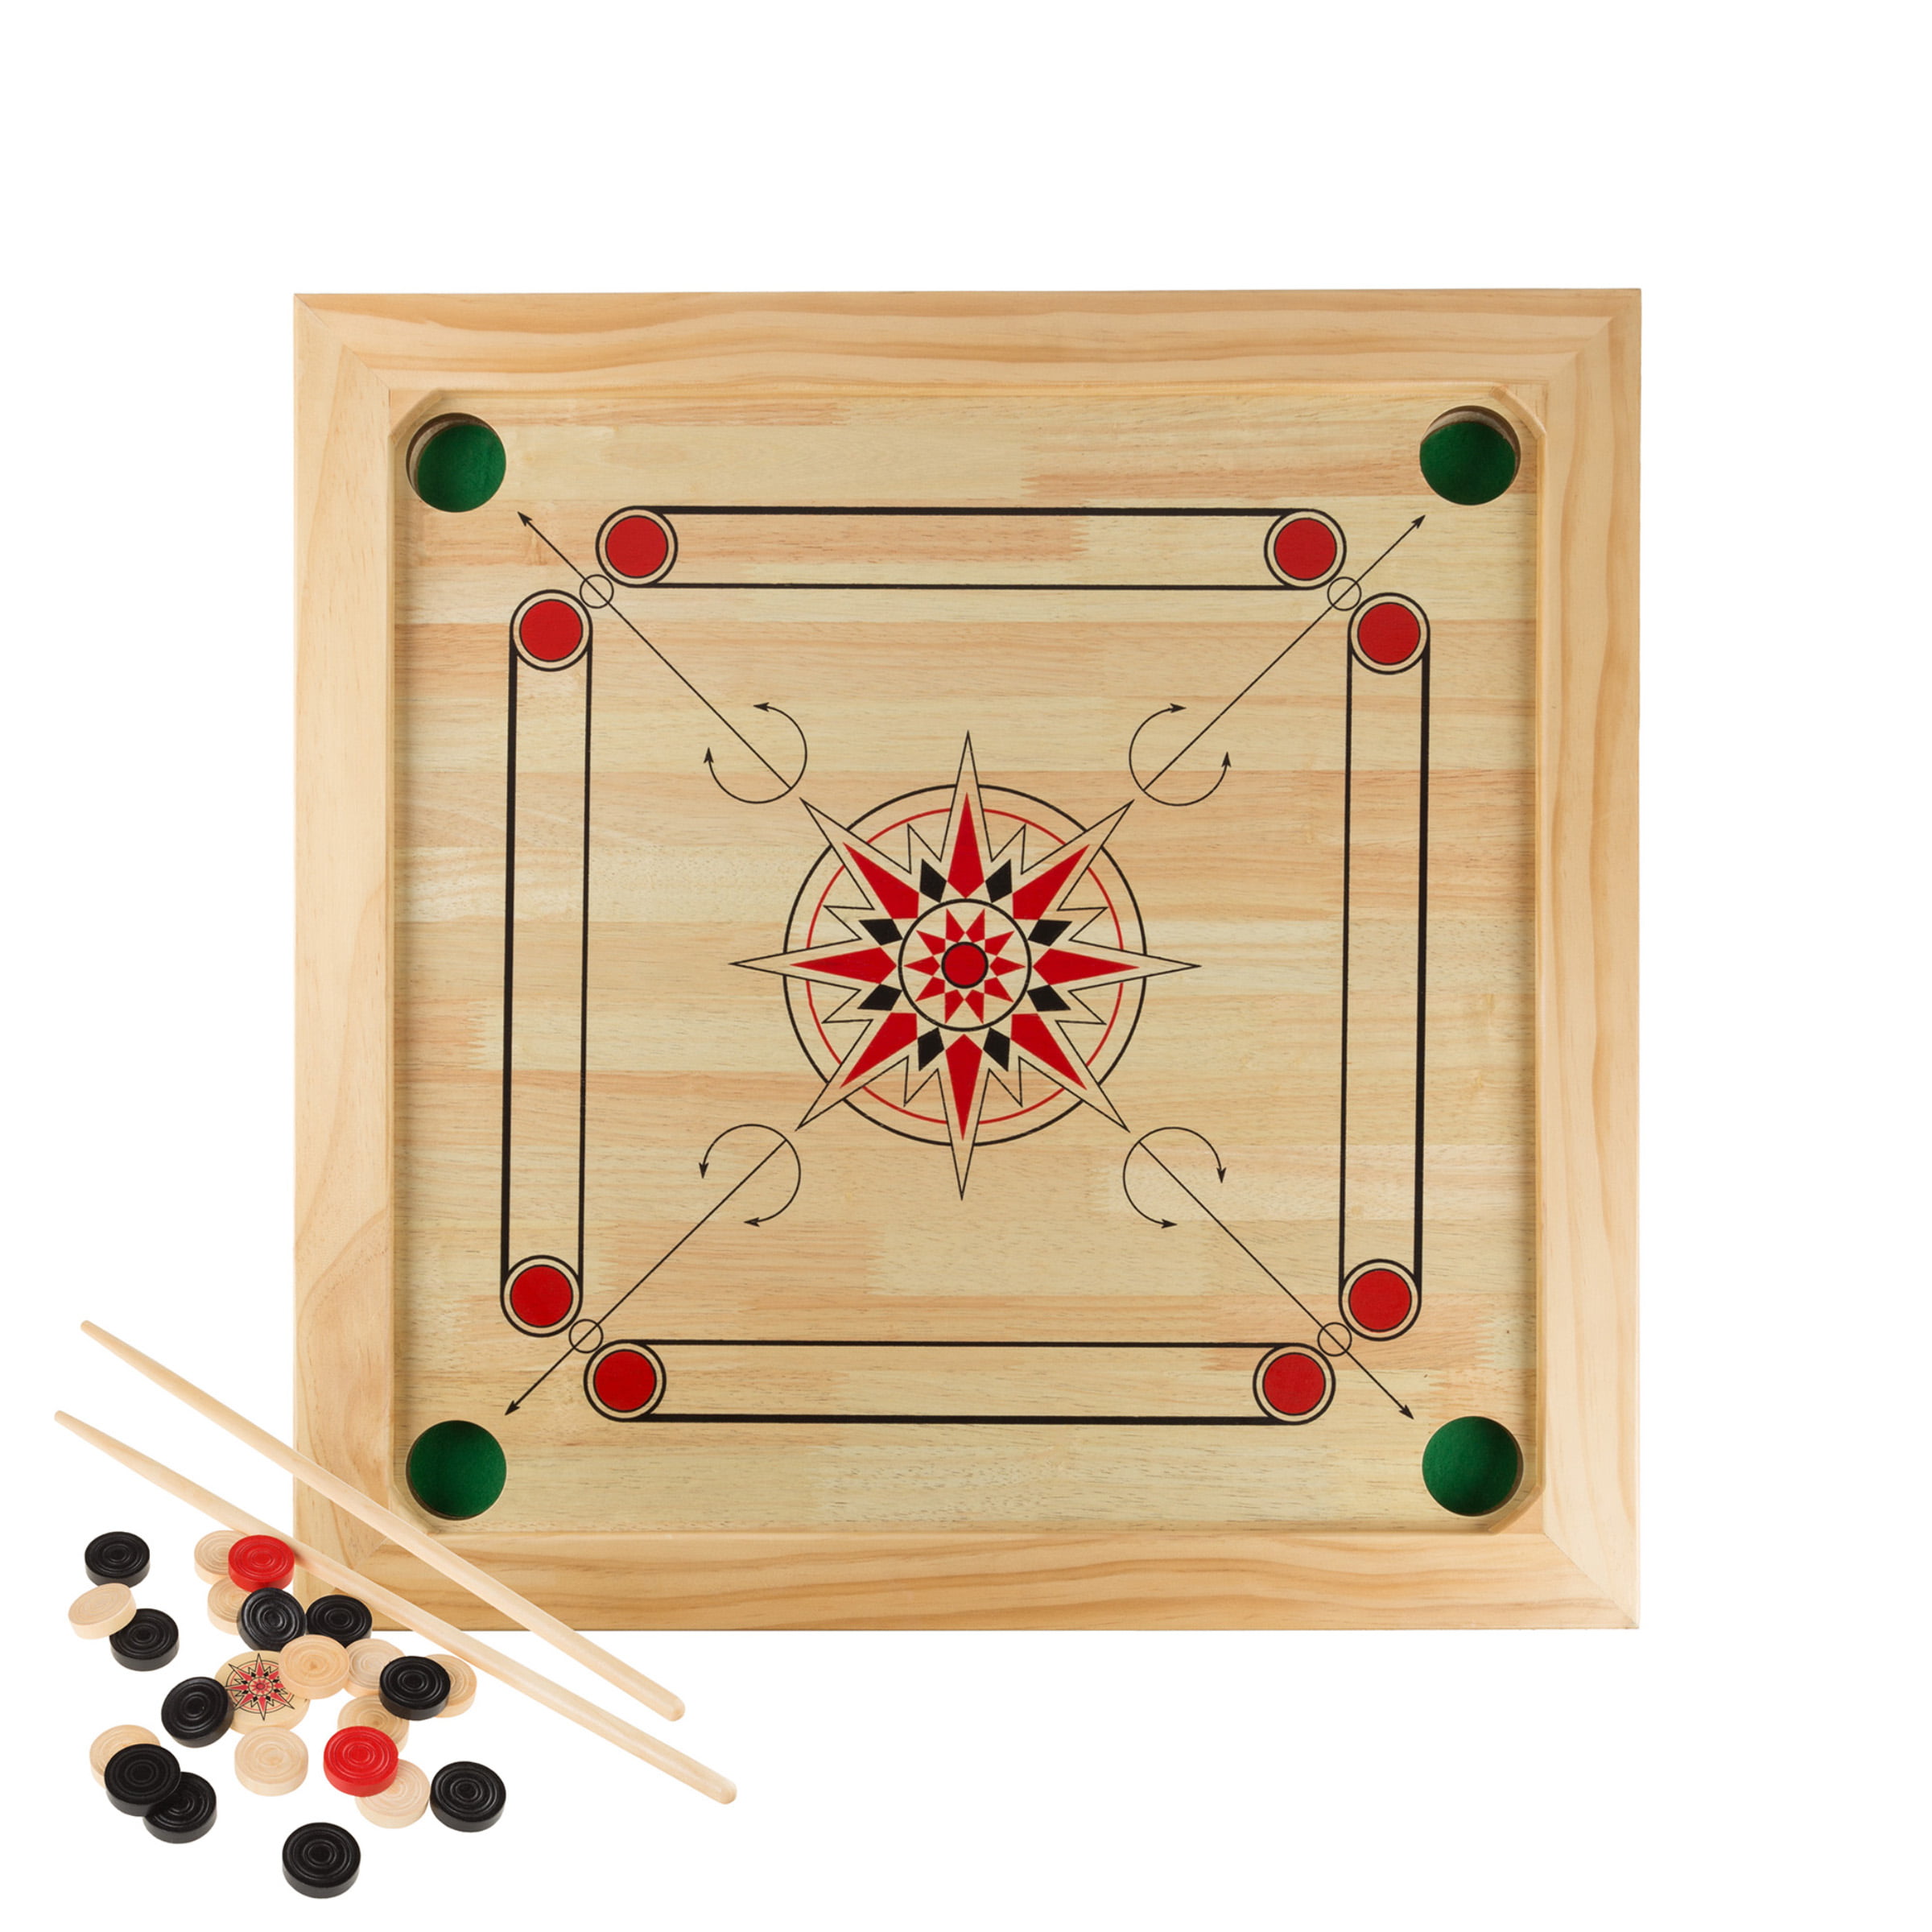 Large Size Wooden Carrom Board Game Double-sided 28" FUN With Family And Friends